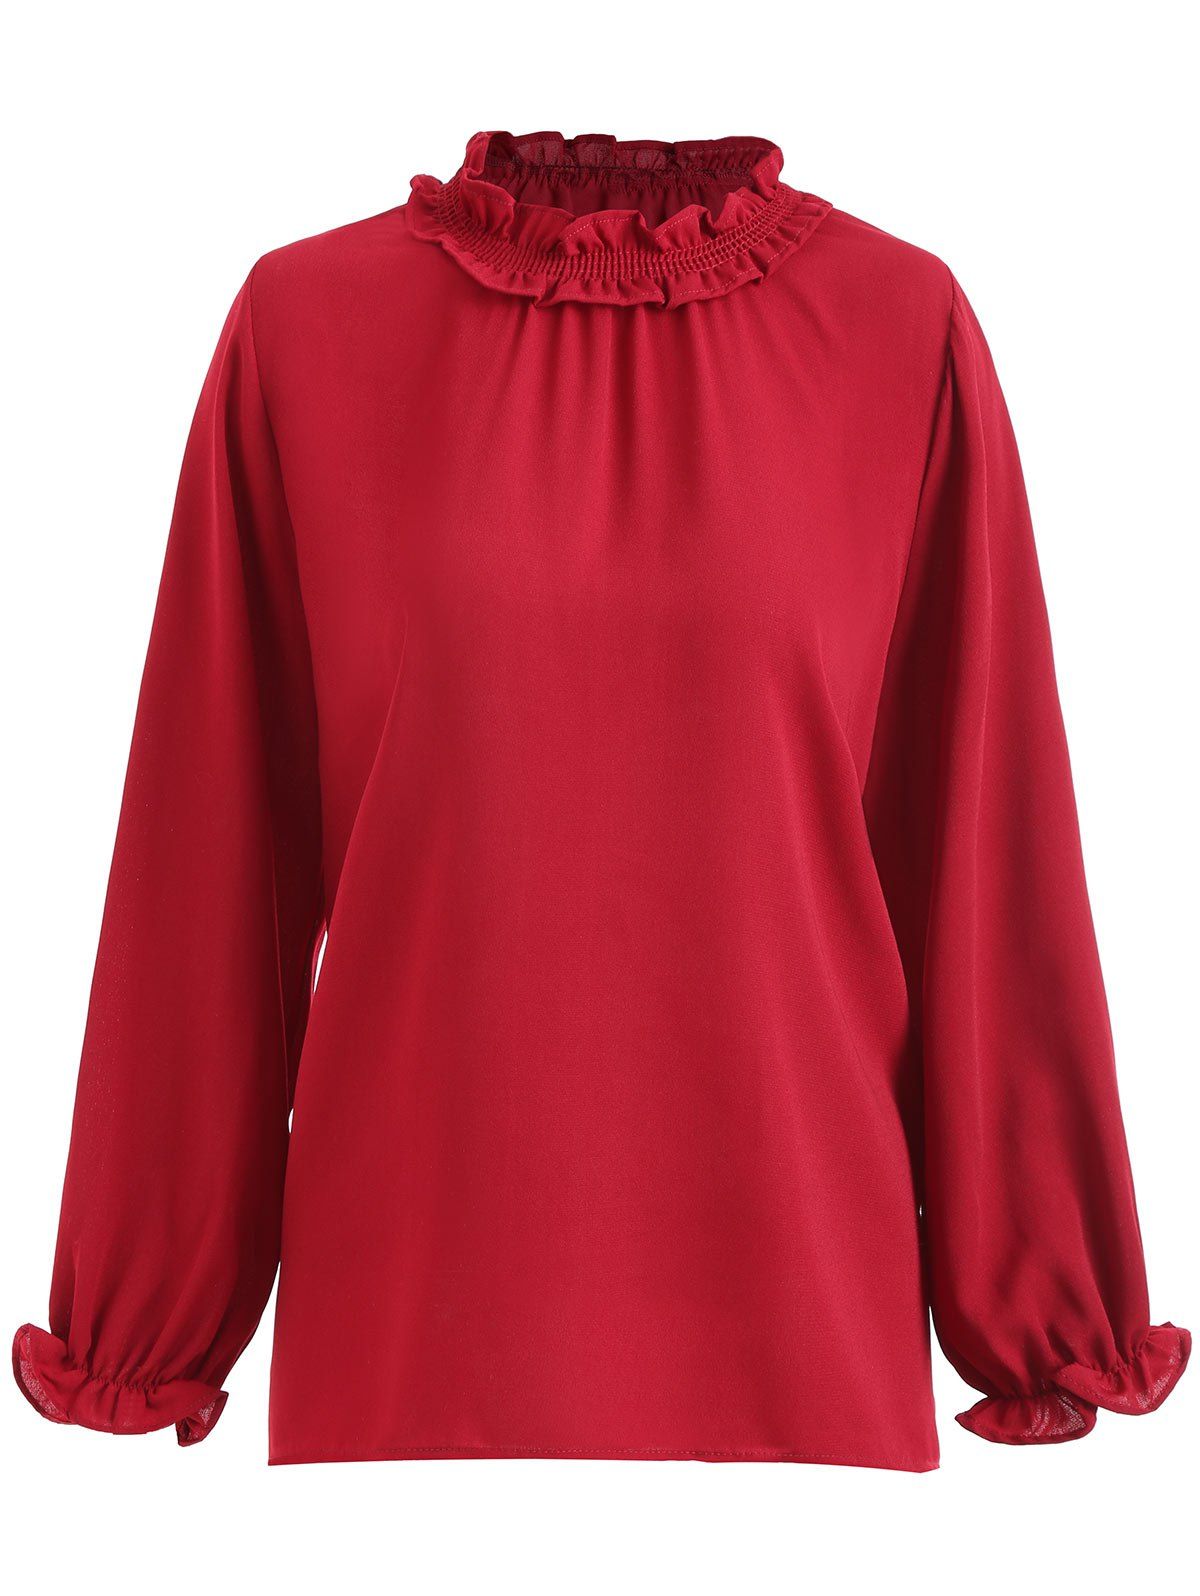 [17% OFF] 2020 Ruffle Neck Flounce Plus Size Blouse In RED | DressLily